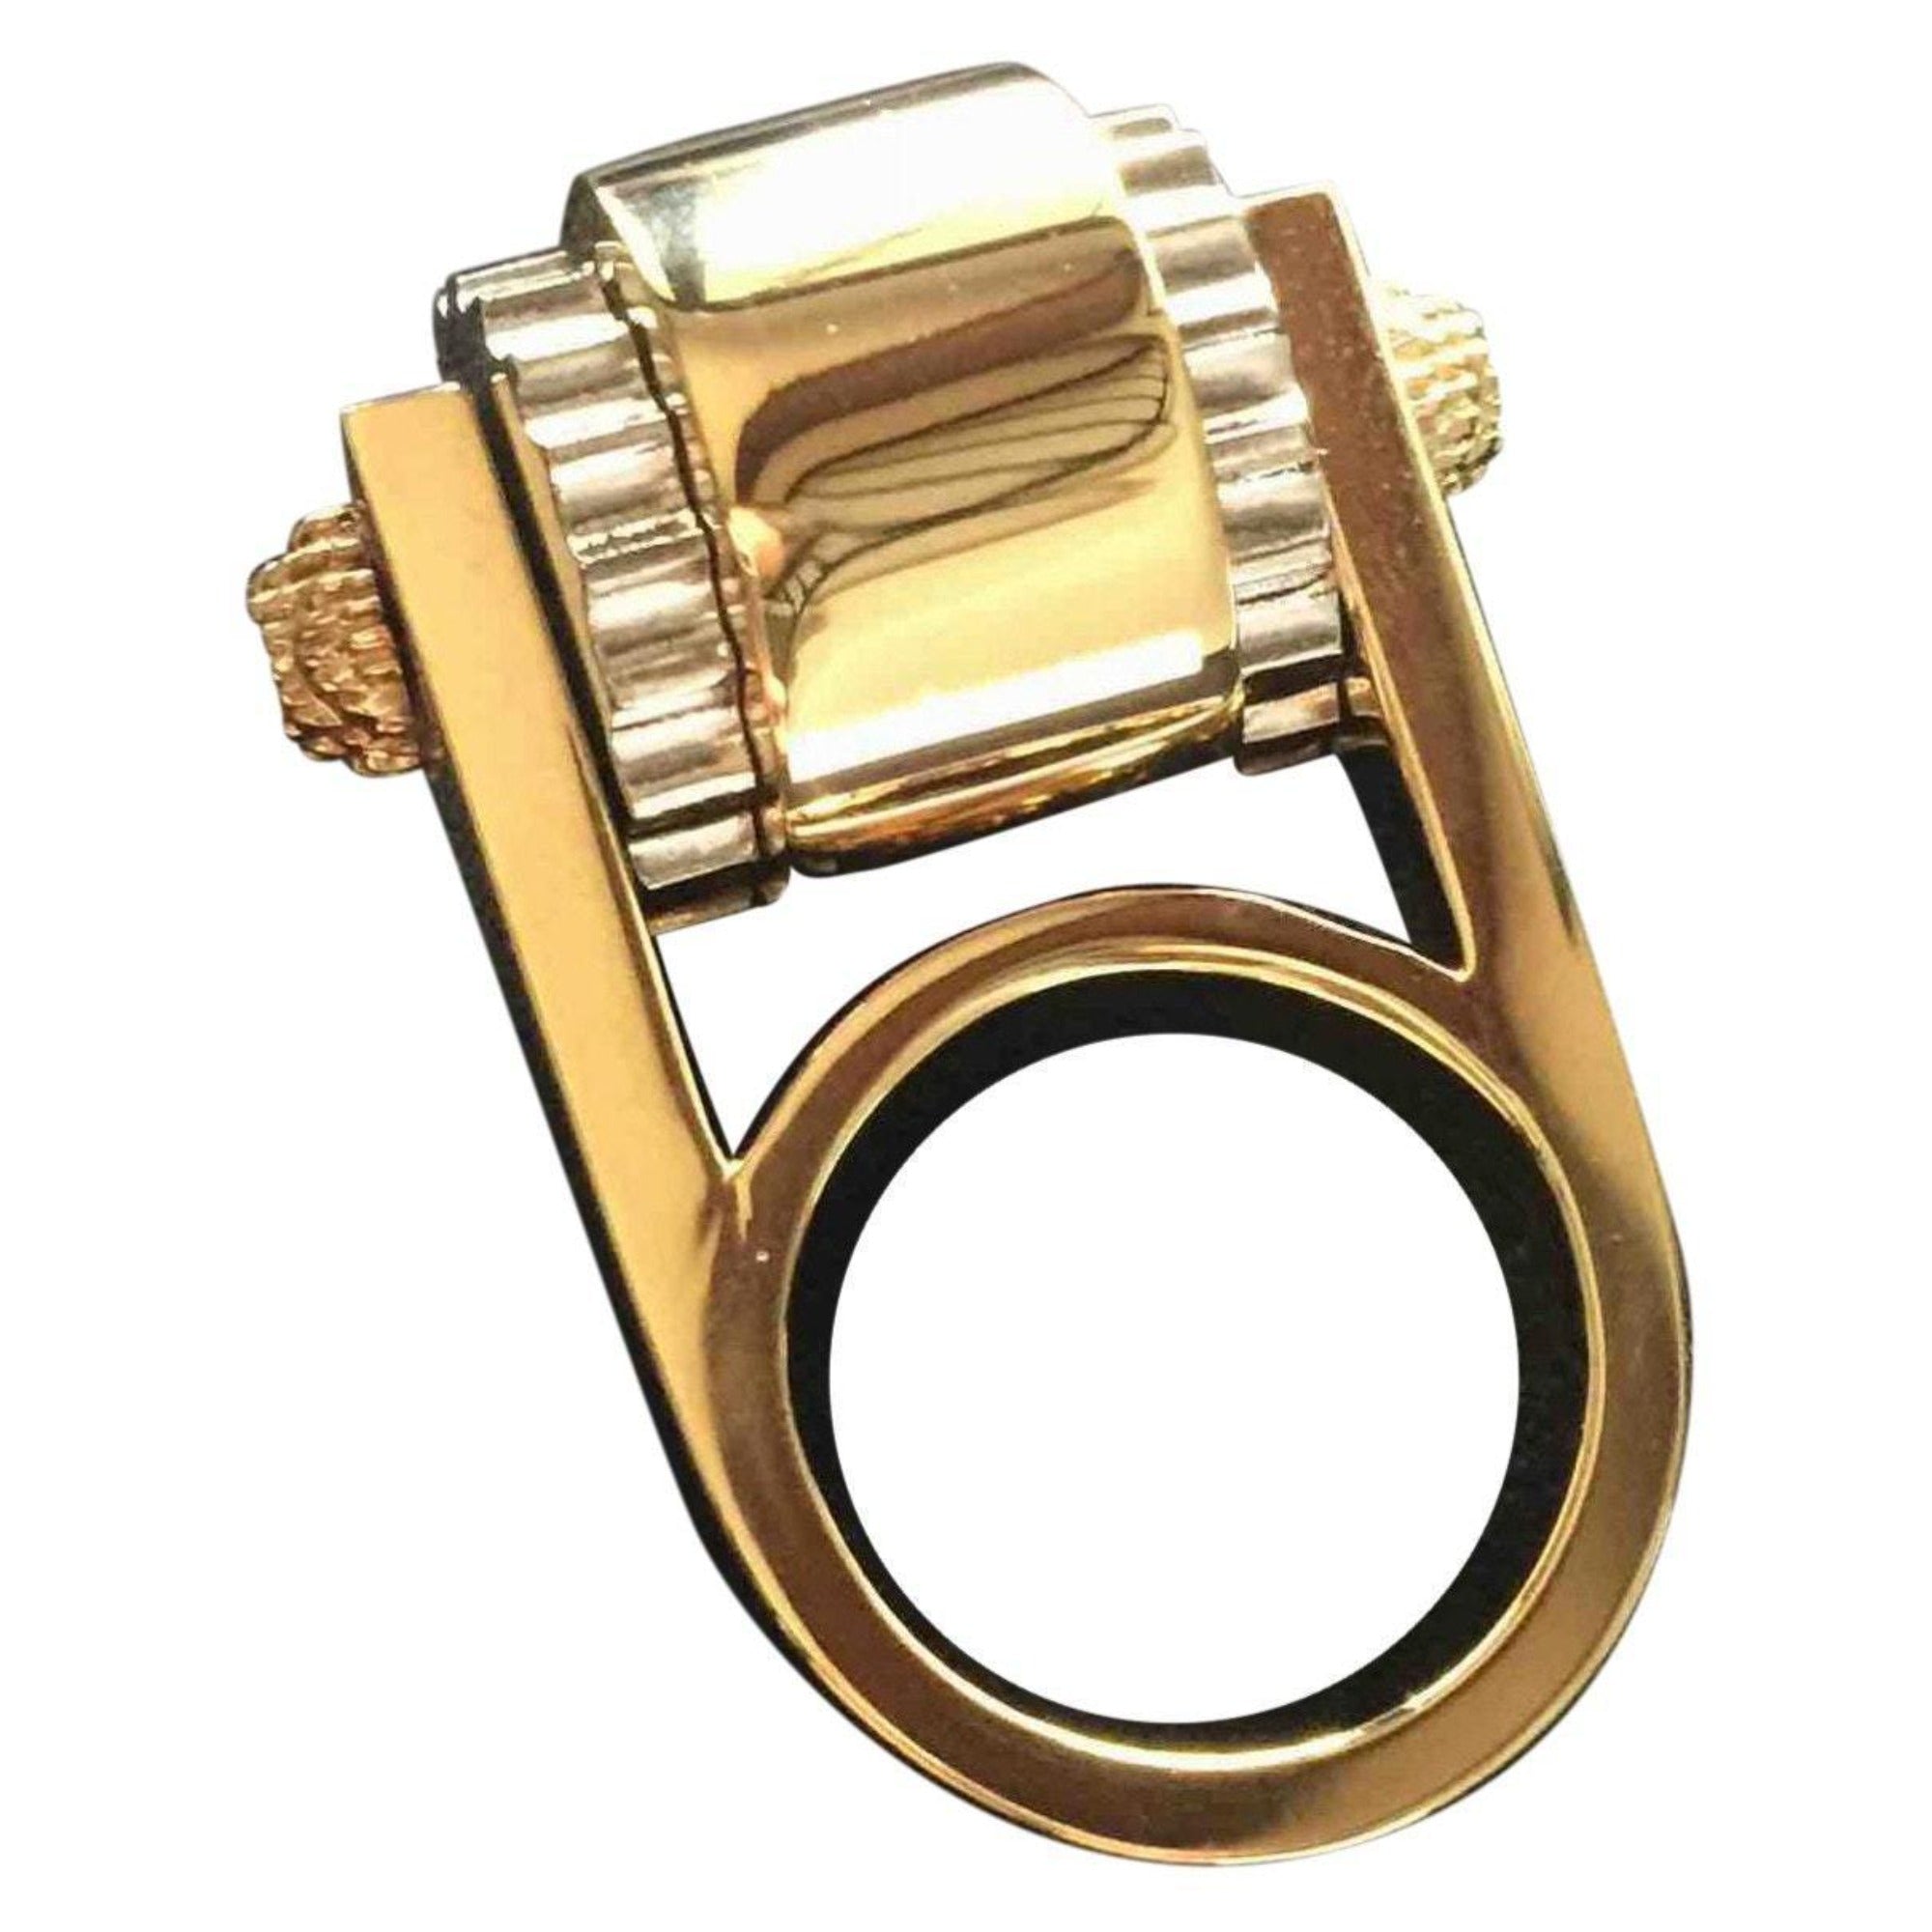 Balenciaga Women's Gold Ring Size: 5 at_Queen_Bee_of_Beverly_Hills